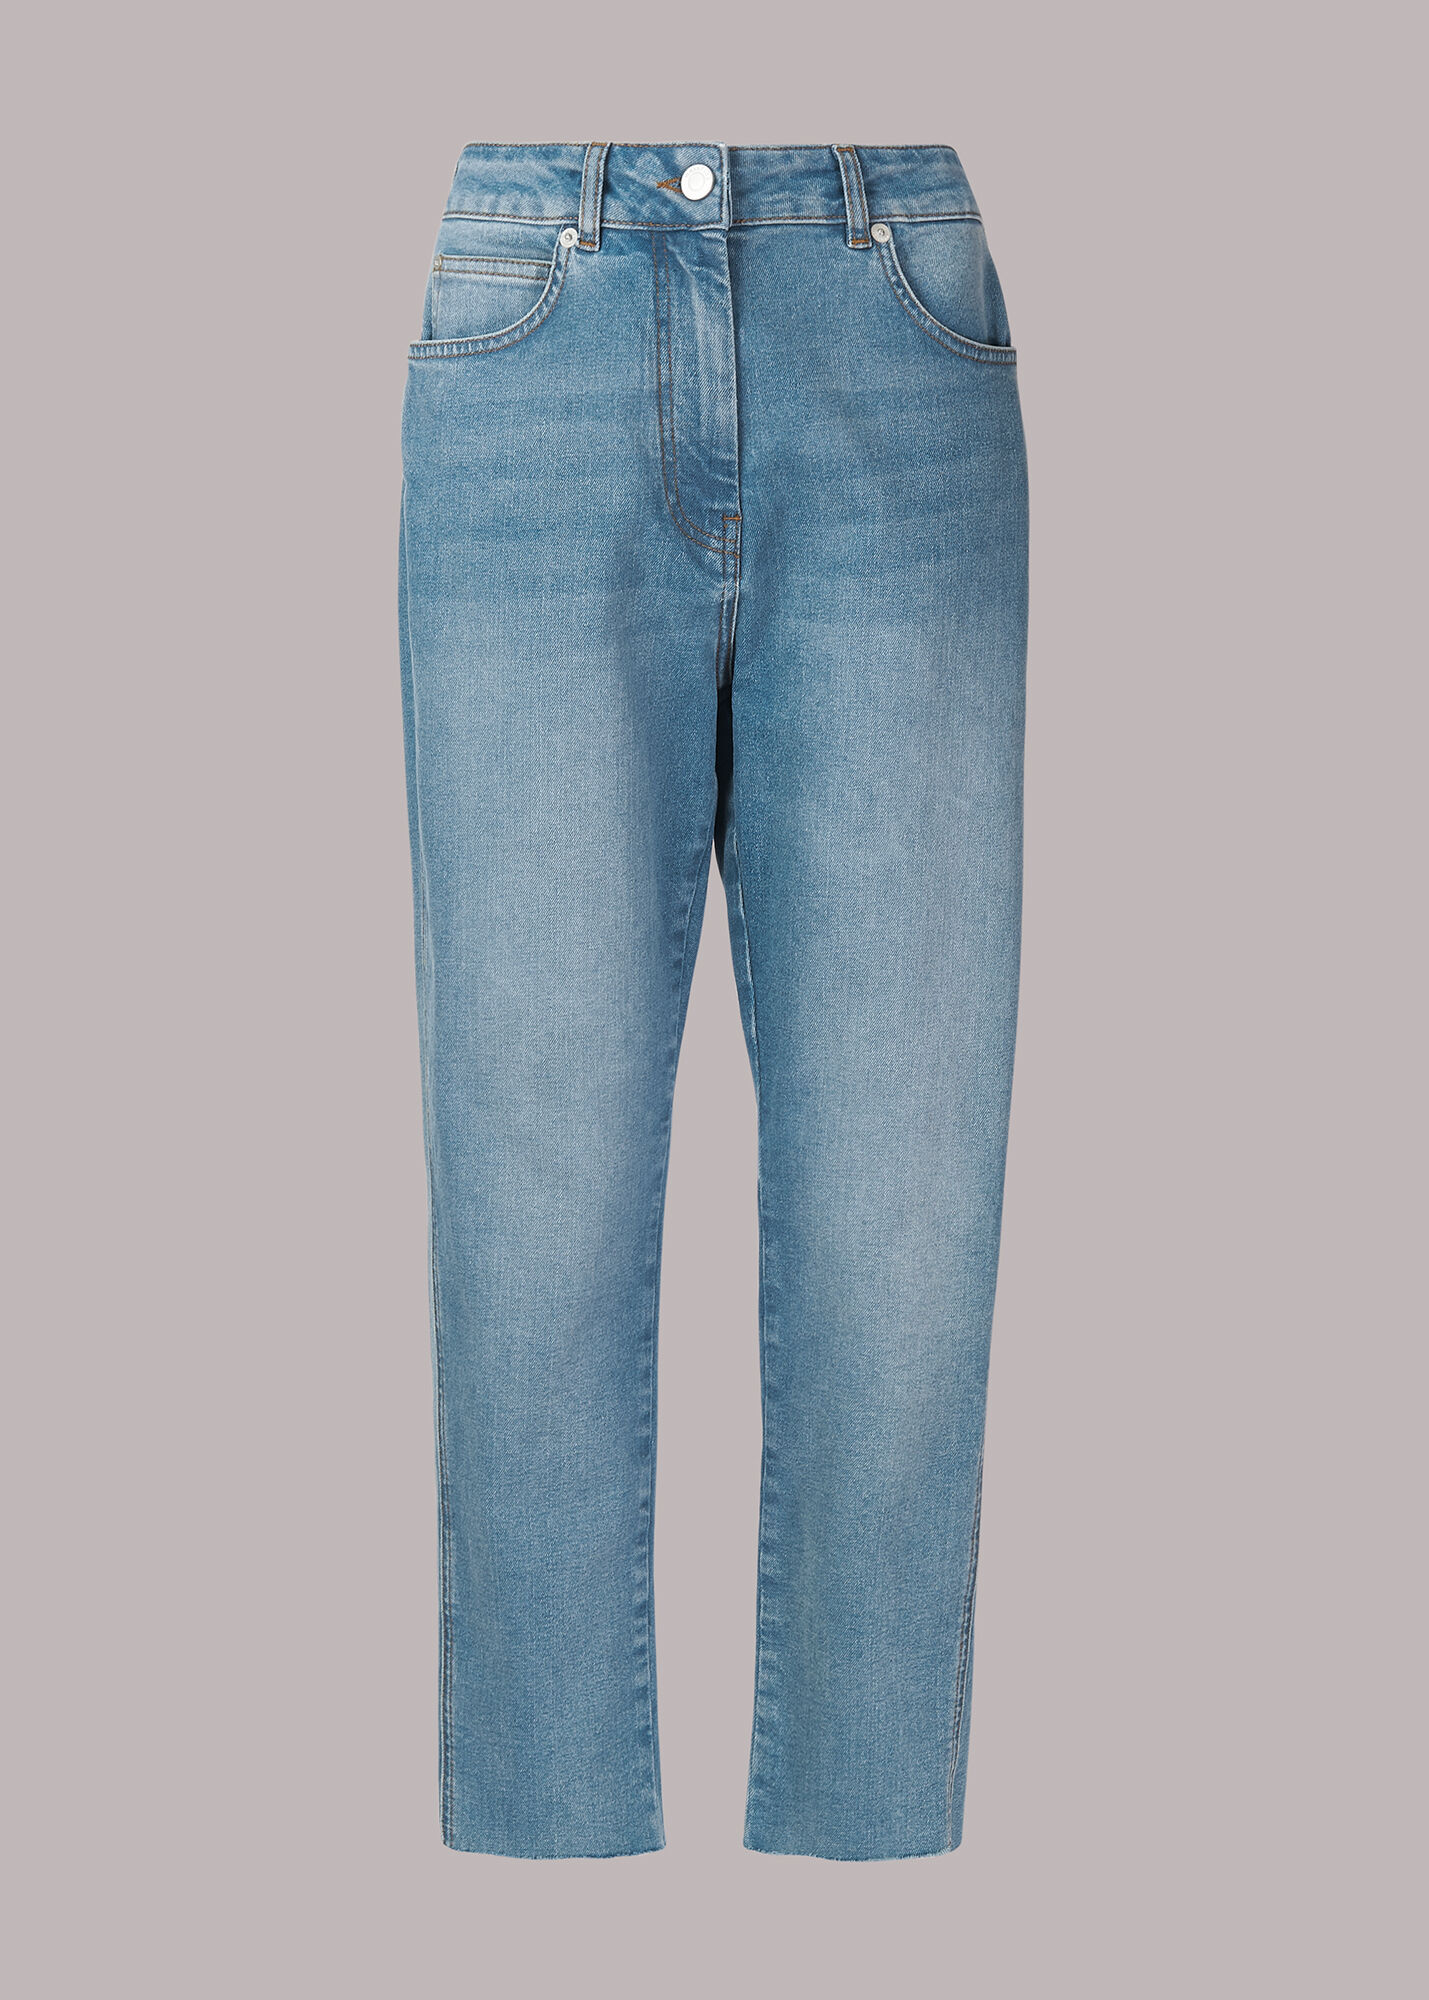 Blue High-Waisted Slim Jeans With Frayed Hem | Whistles